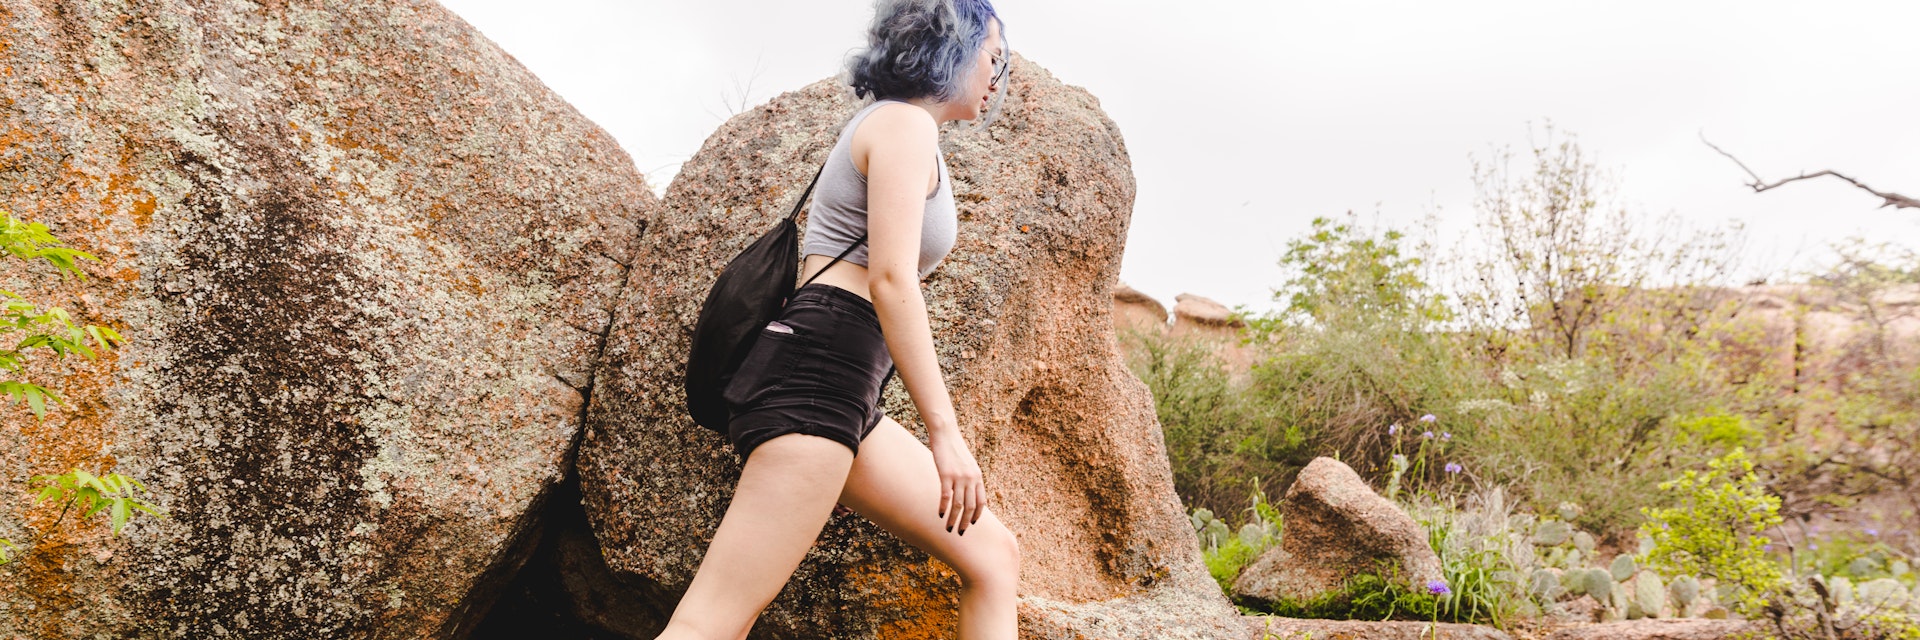 Enchanted Rock State Natural Area, Texas - Teenage Girl with blue hair, hiking on large granite boulders in a state park, isolated from people due to covid 19 social distancing regulations